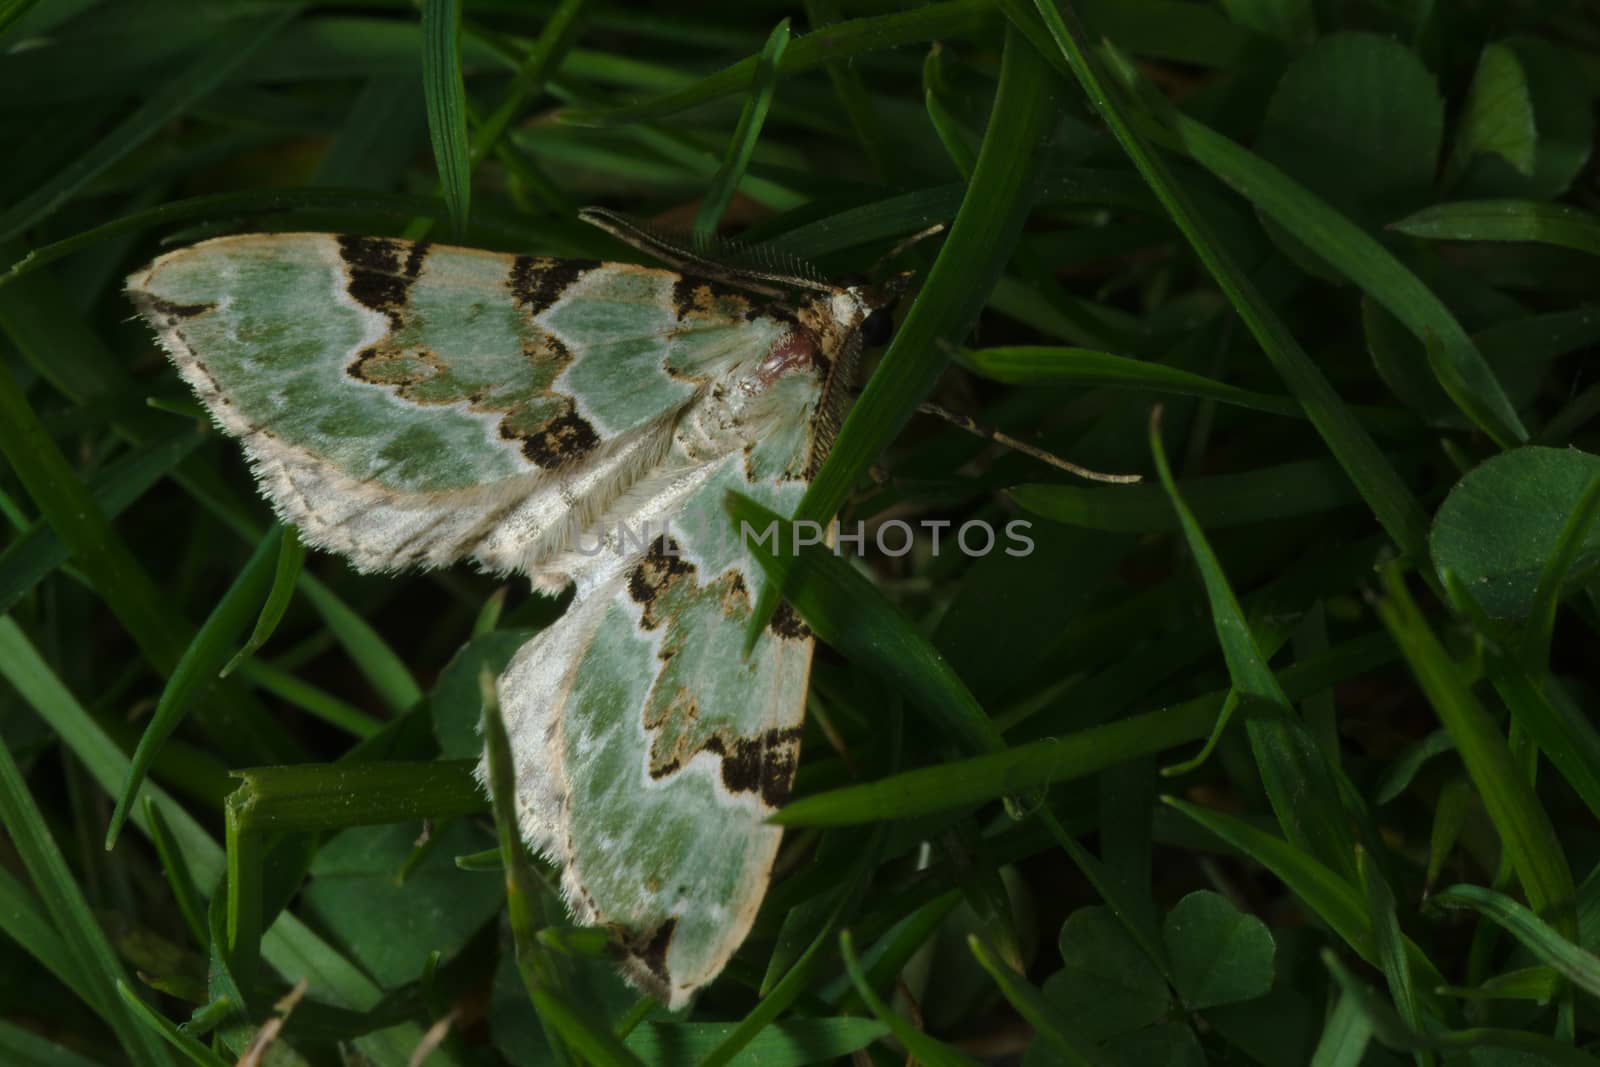 A green carpet moth is camouflaged amongst deep green grass in this macro photo.